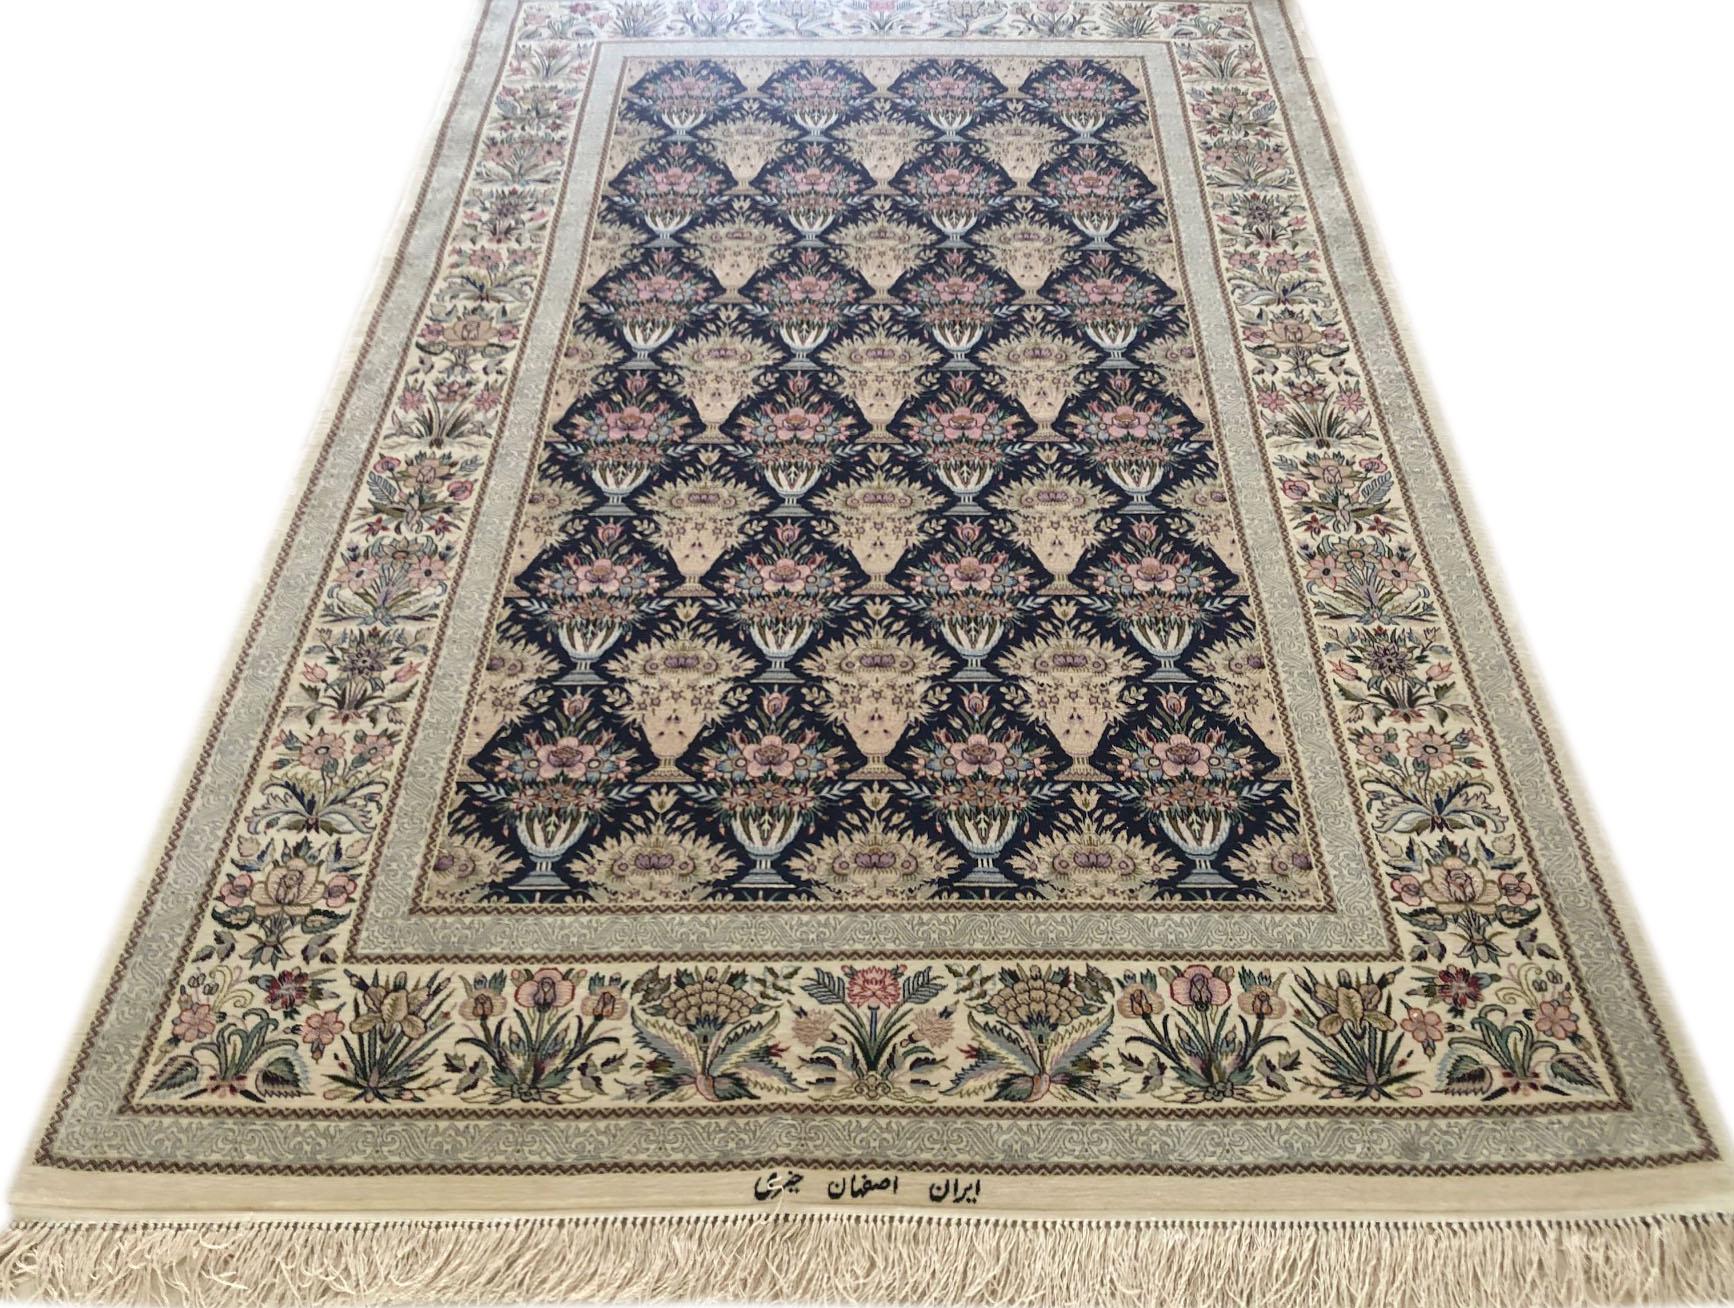 This authentic Persian Isfahan rug has wool and silk pile on silk foundation with an excellent condition. The color combination and design in this rug is absolutely outstanding. The base color is cream and the border is dark blue. This rug has